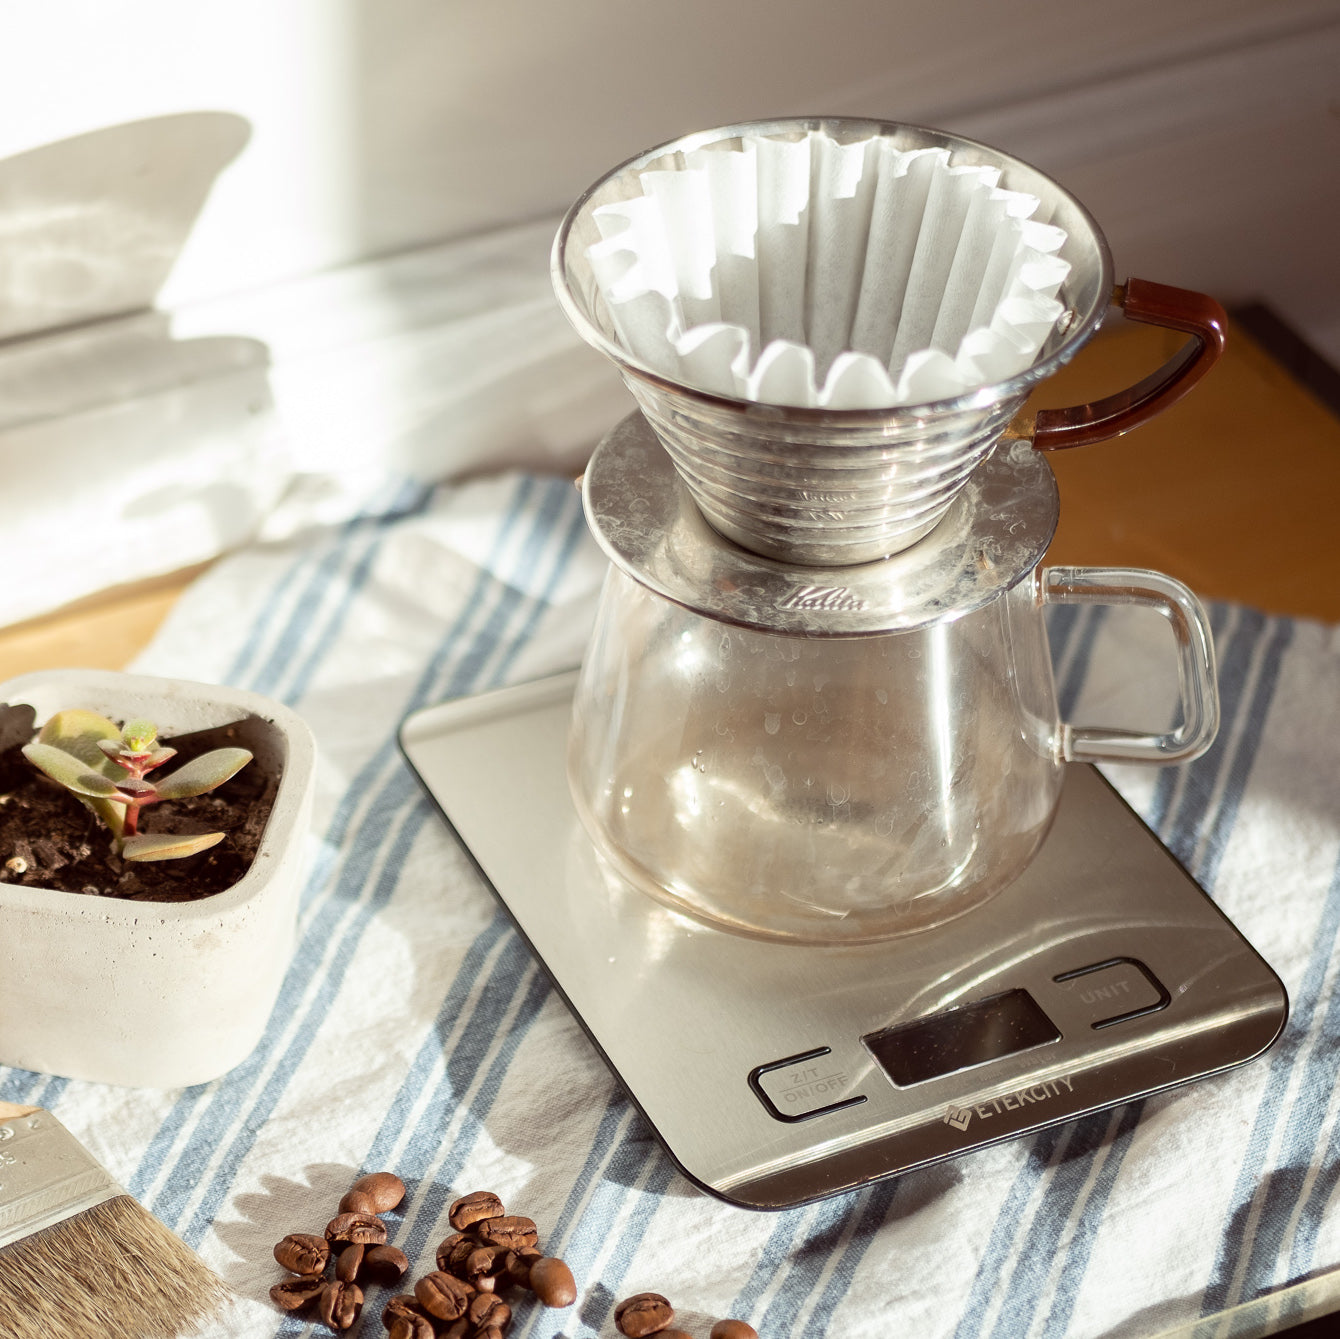 Hario V60 Pour-over Coffee Guide for Beginners